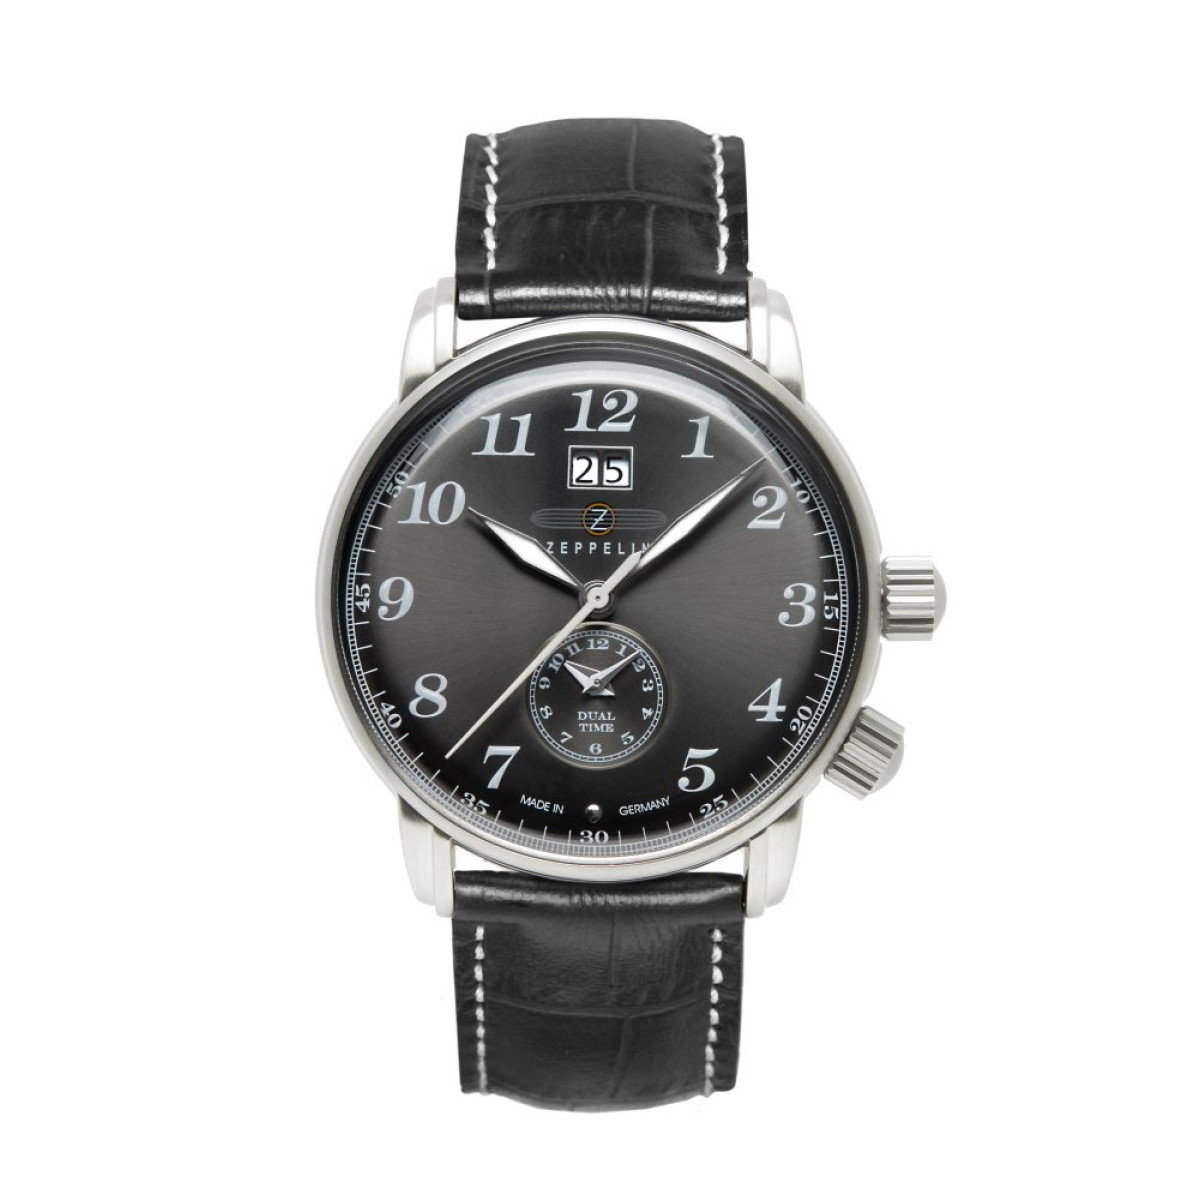 LZ127 Graf Zeppelin Dual Time with leather strap